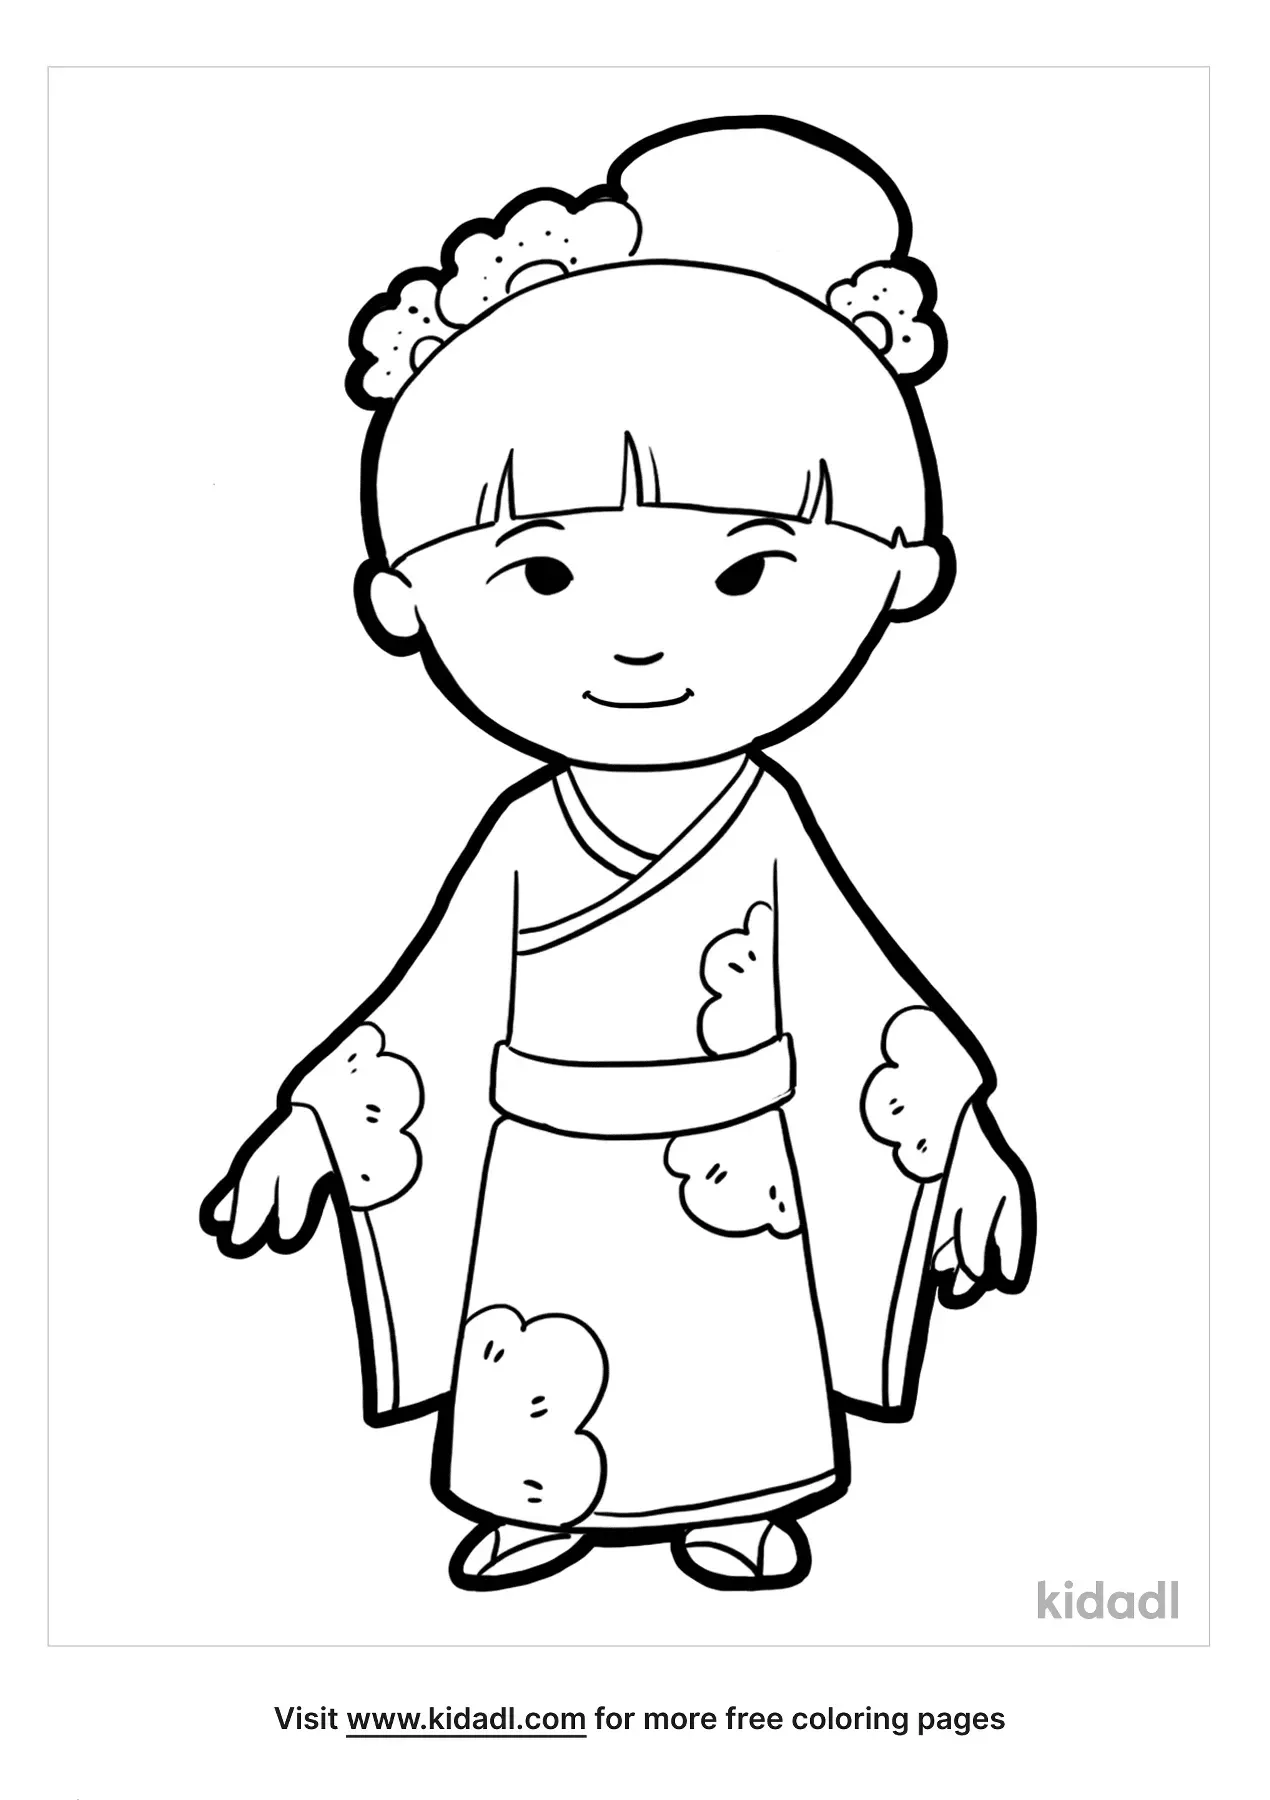 Free Japanese Coloring Page | Coloring Page Printables | Kidadl